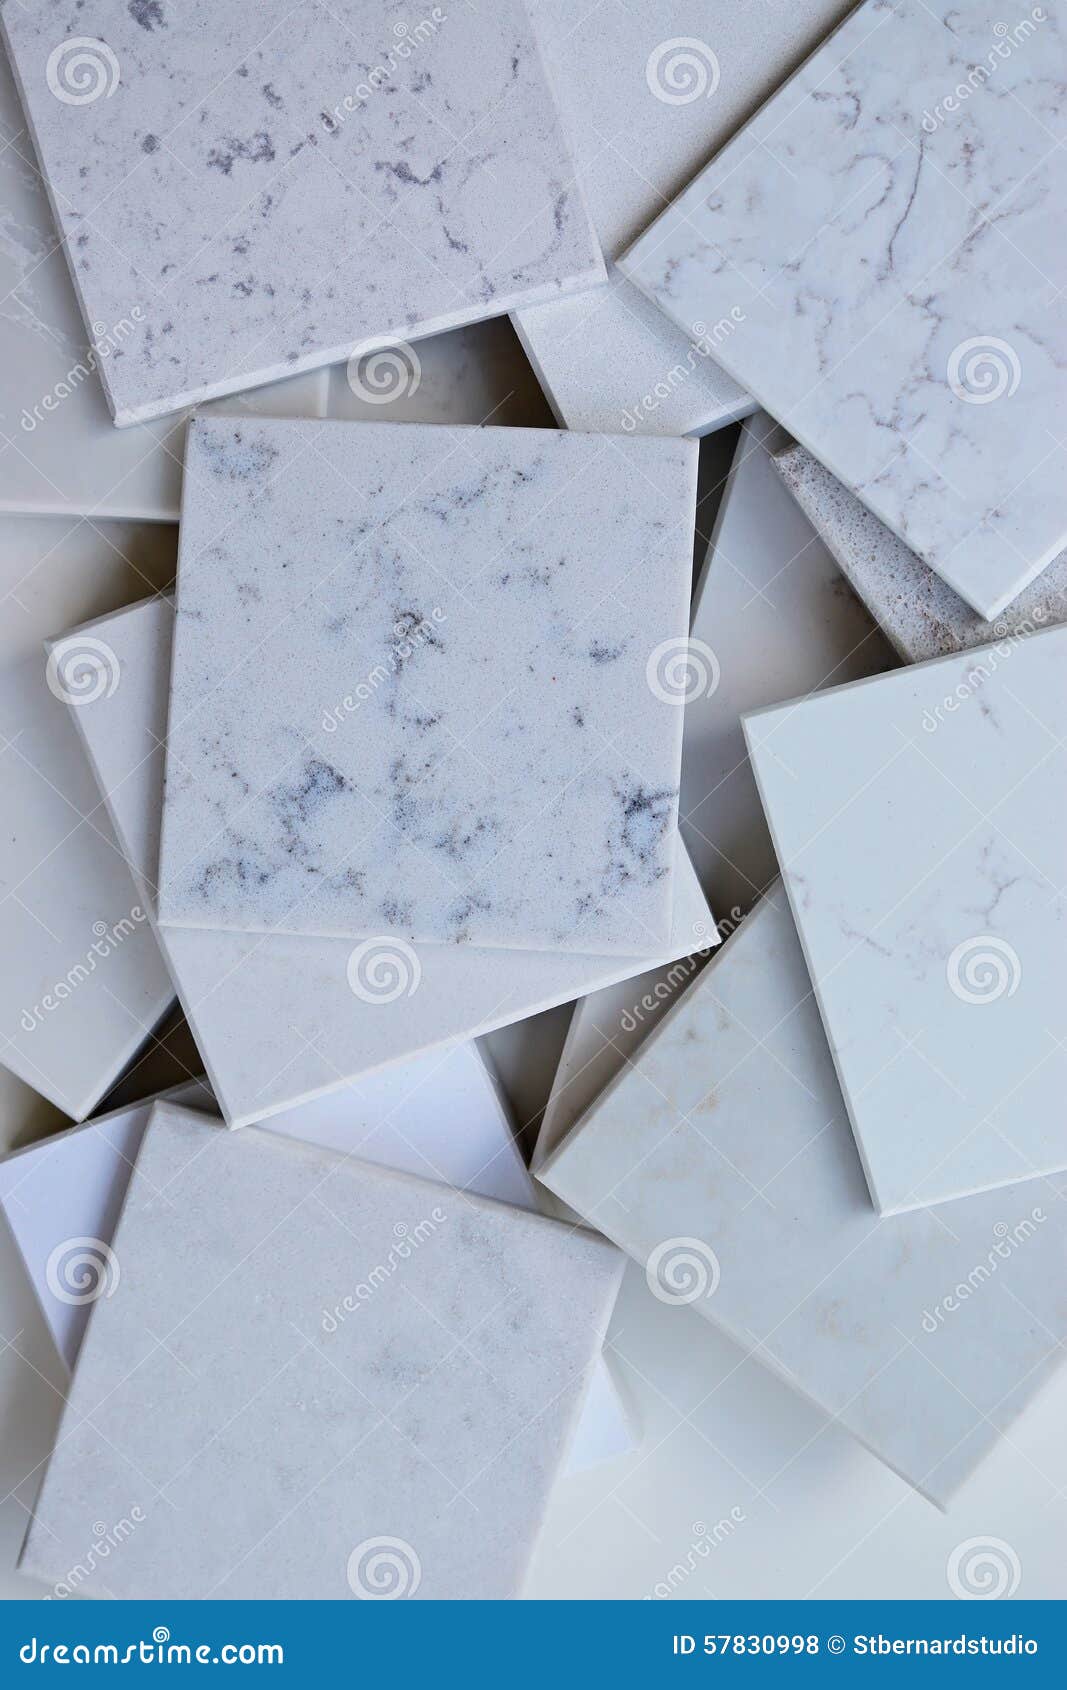 samples of different stones mainly white based with marble like grains and veins